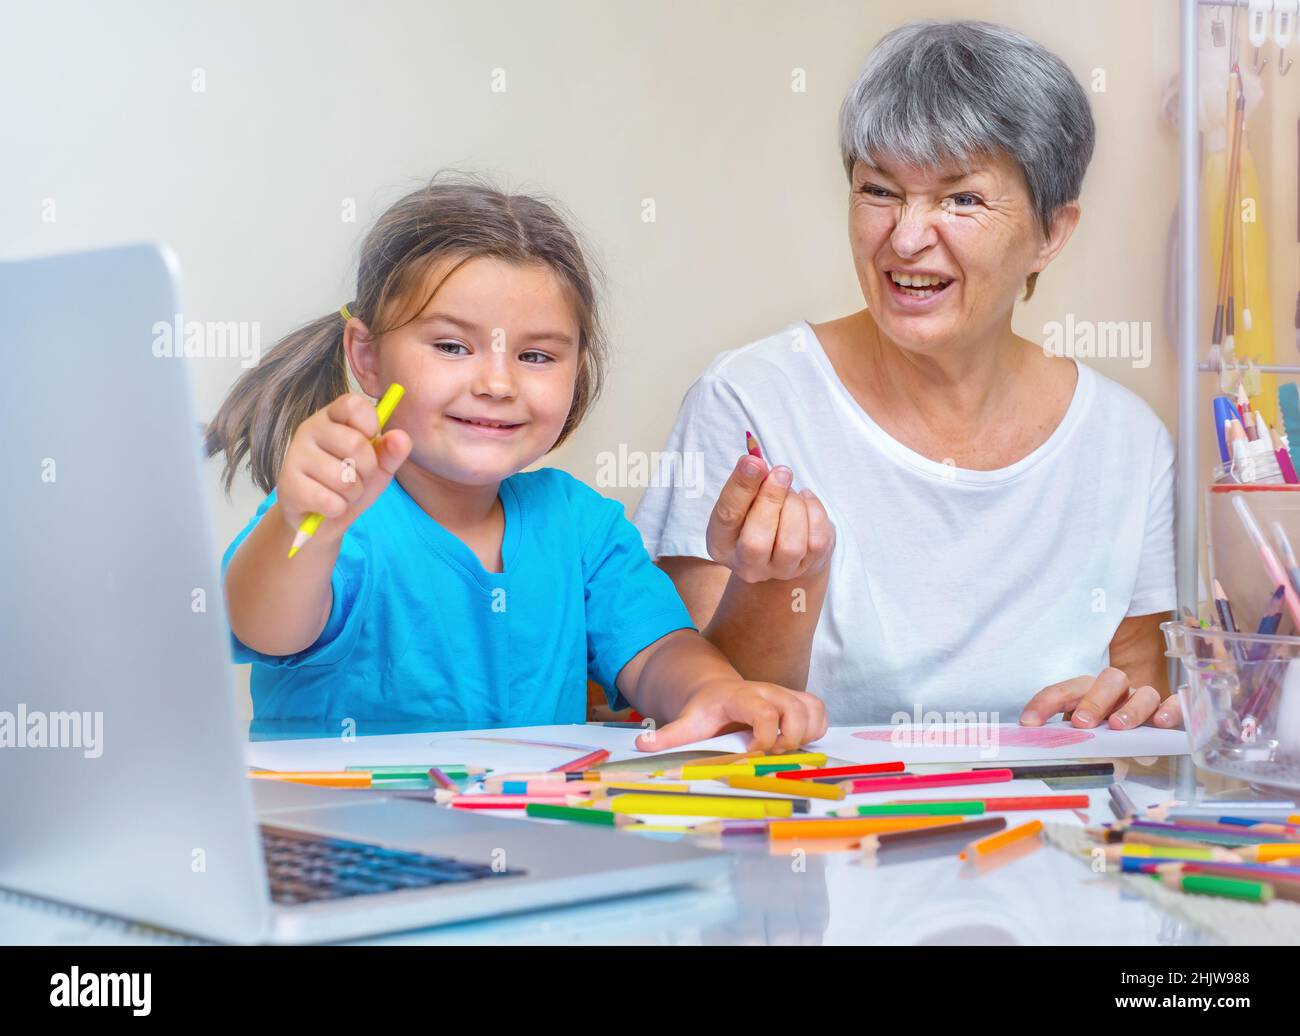 Grandmother and child learn to draw together online Stock Photo